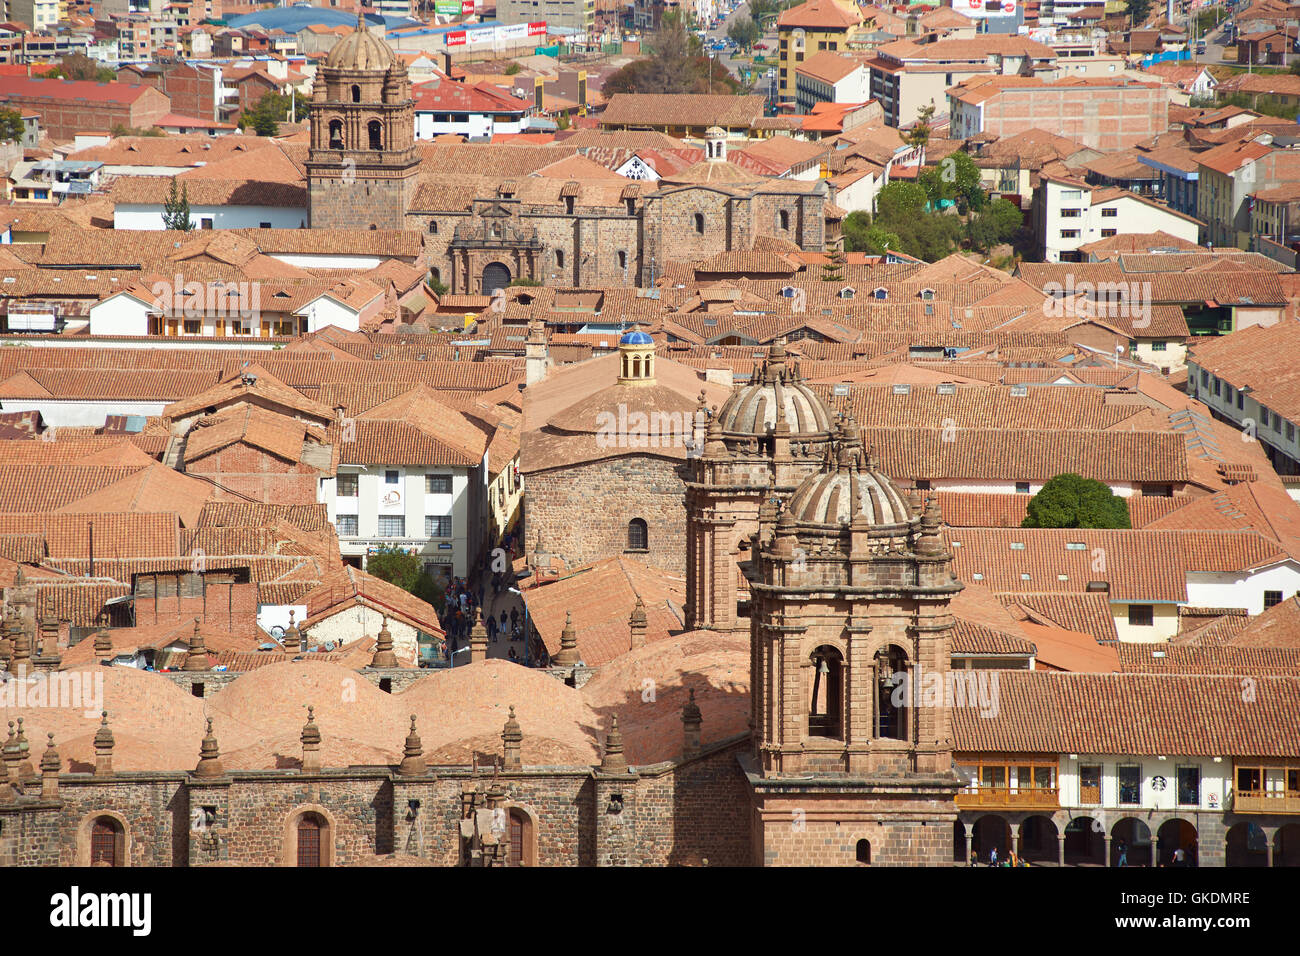 Cusco Cathedral Stock Photo